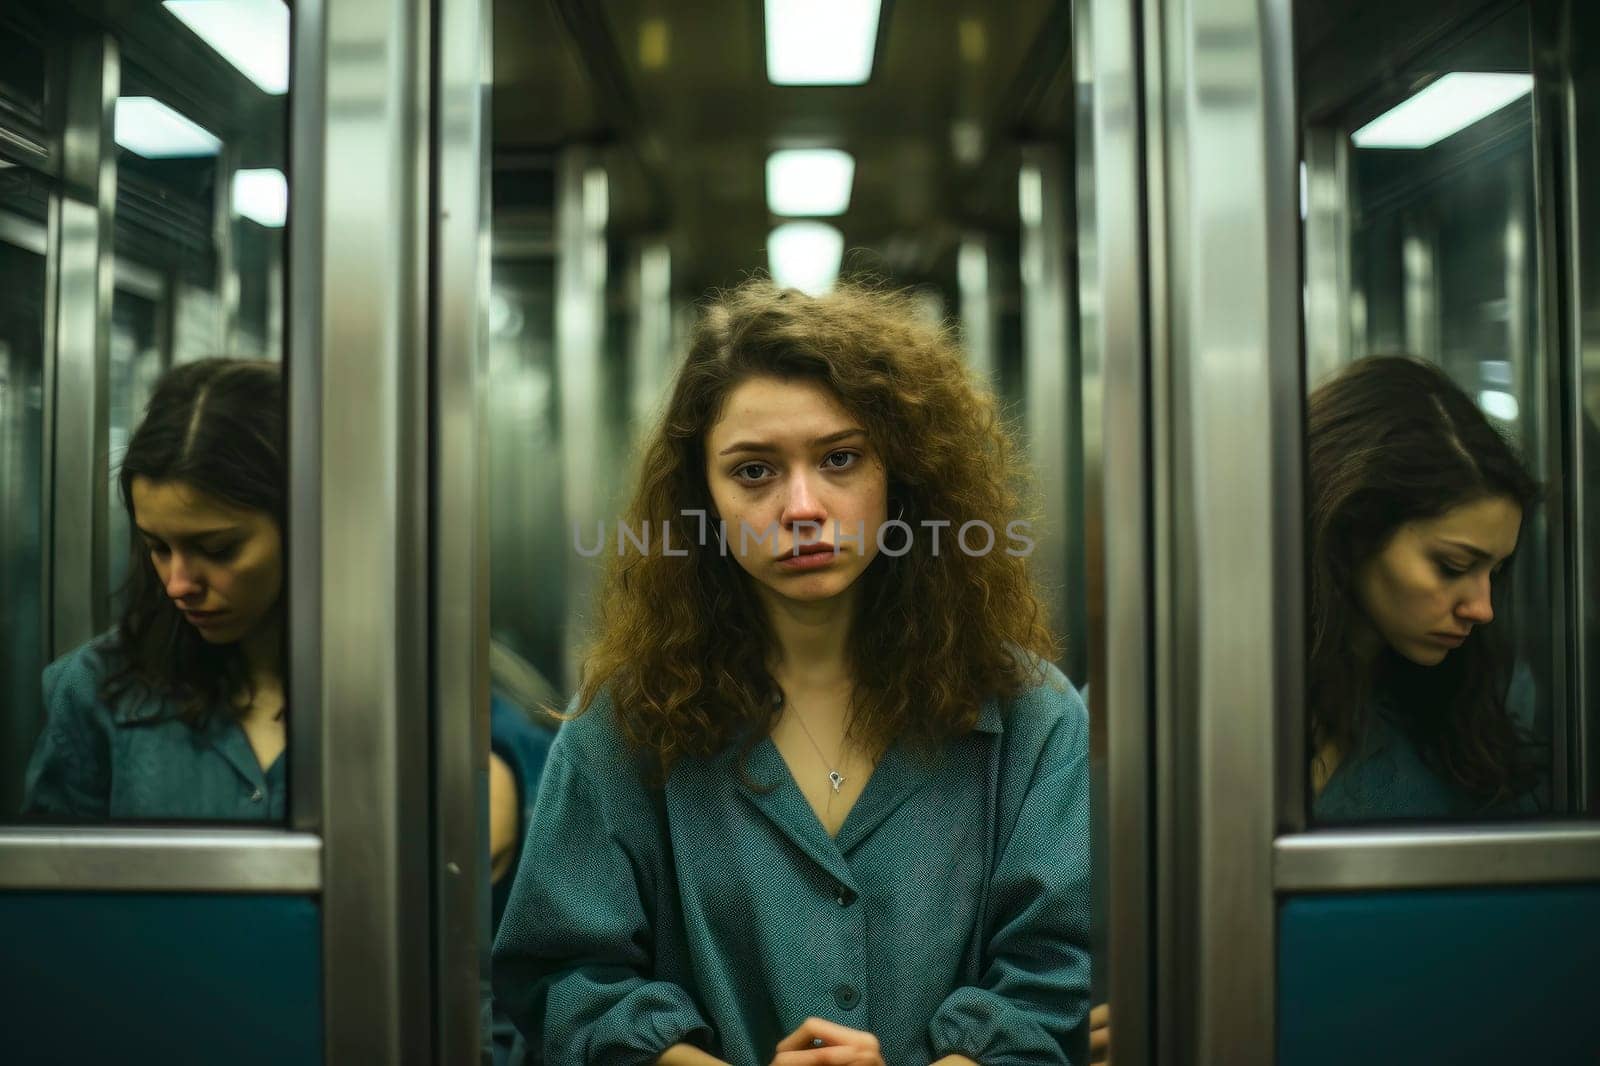 The Many Faces Within: Portrait of a Girl Traveling on the Metro with Her Personalities by pippocarlot